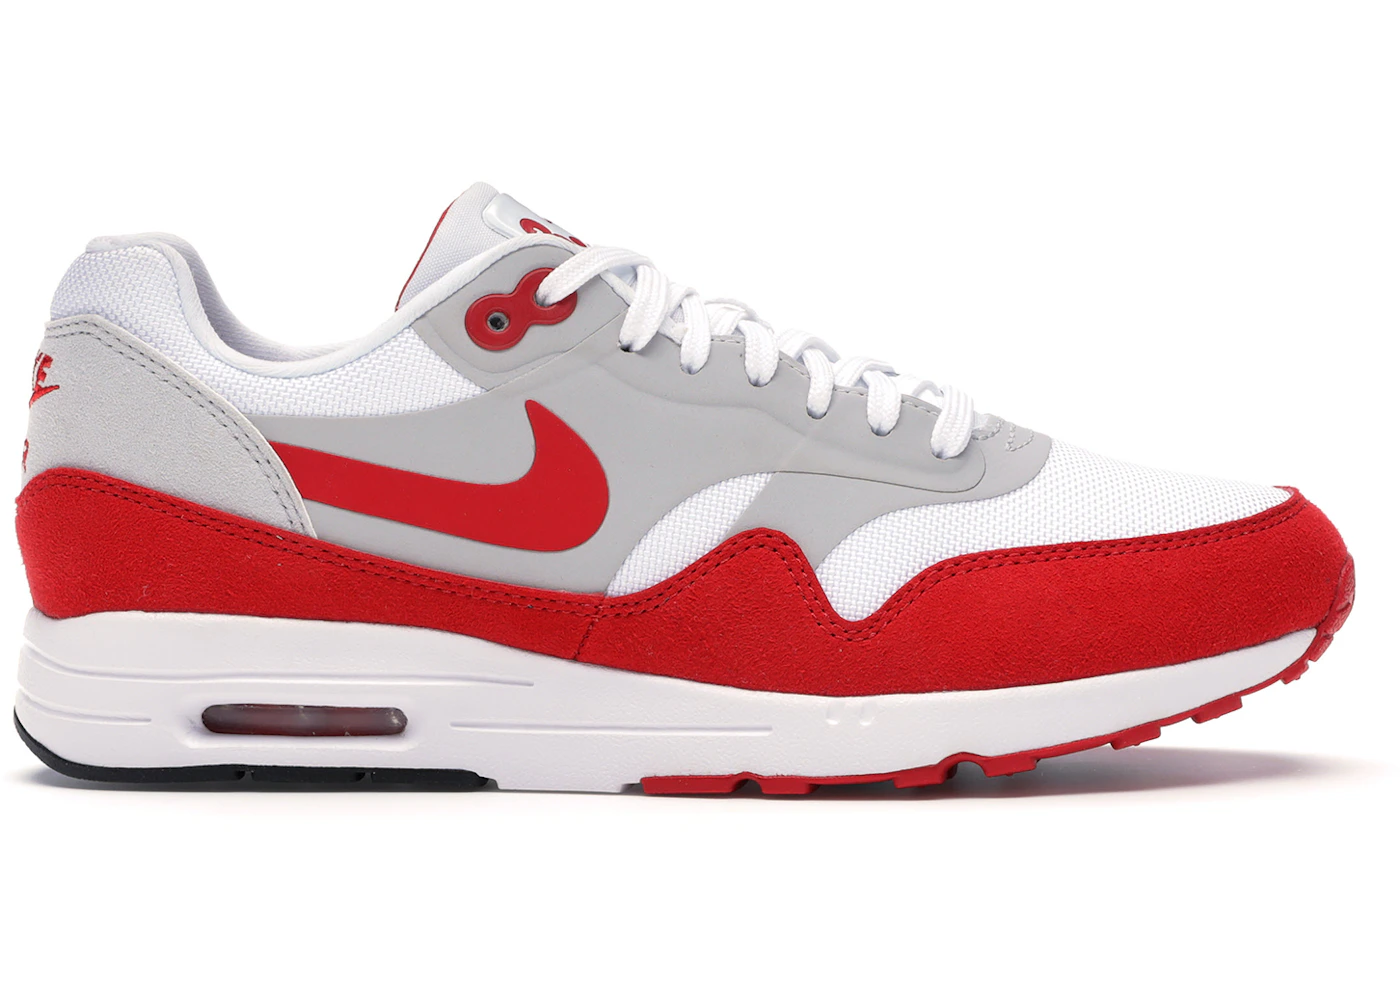 Nike Air Max 1 Ultra Max Day Red (2017) (W) - 908489-101 - ES